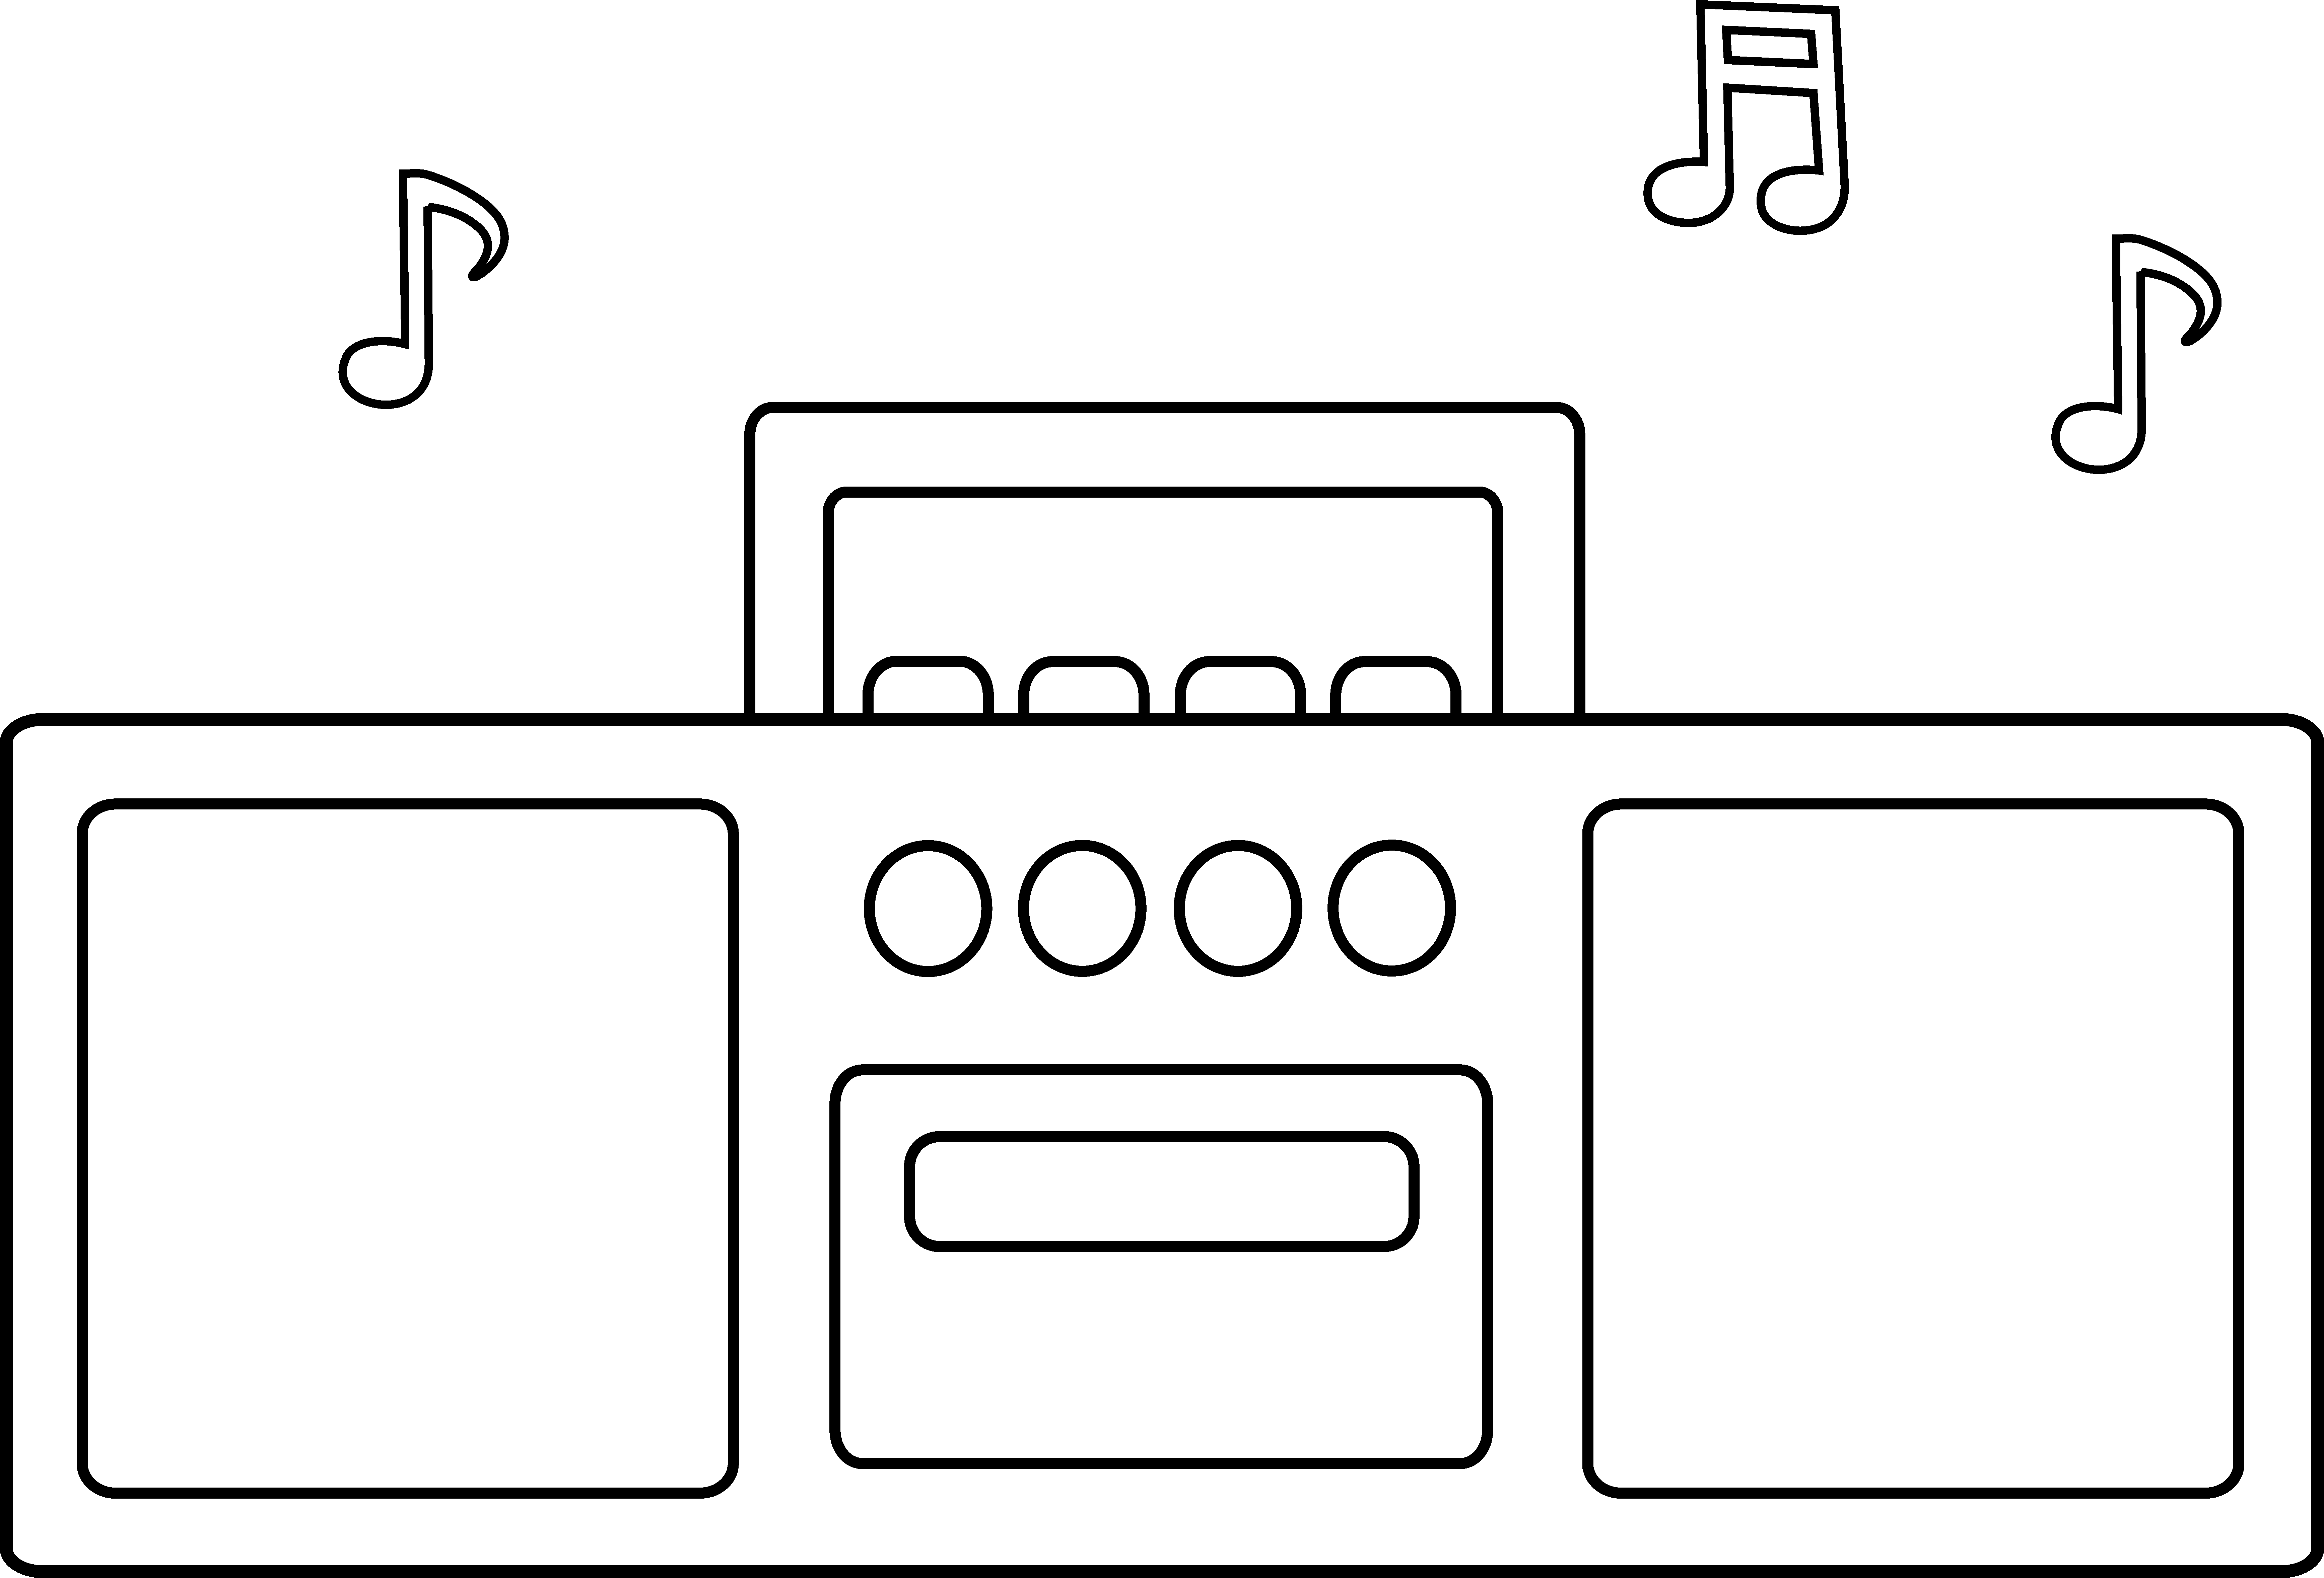 Boombox clipart simple, Boombox simple Transparent FREE for download on